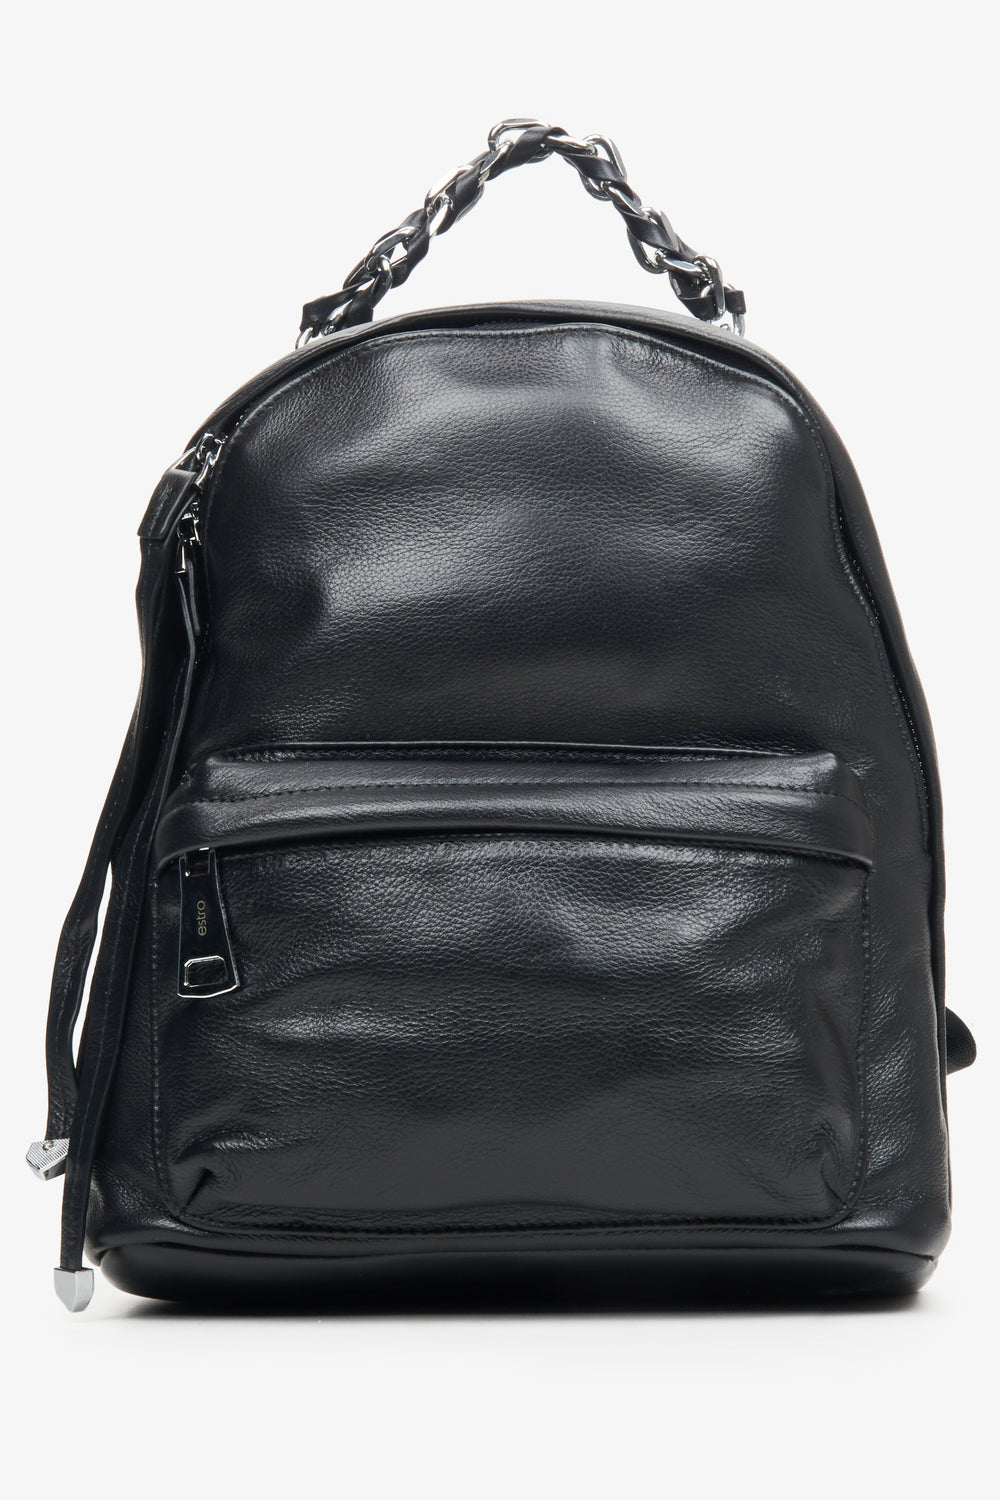 Women's Black Backpack made of Genuine Leather with Silver Details Estro ER00113751.